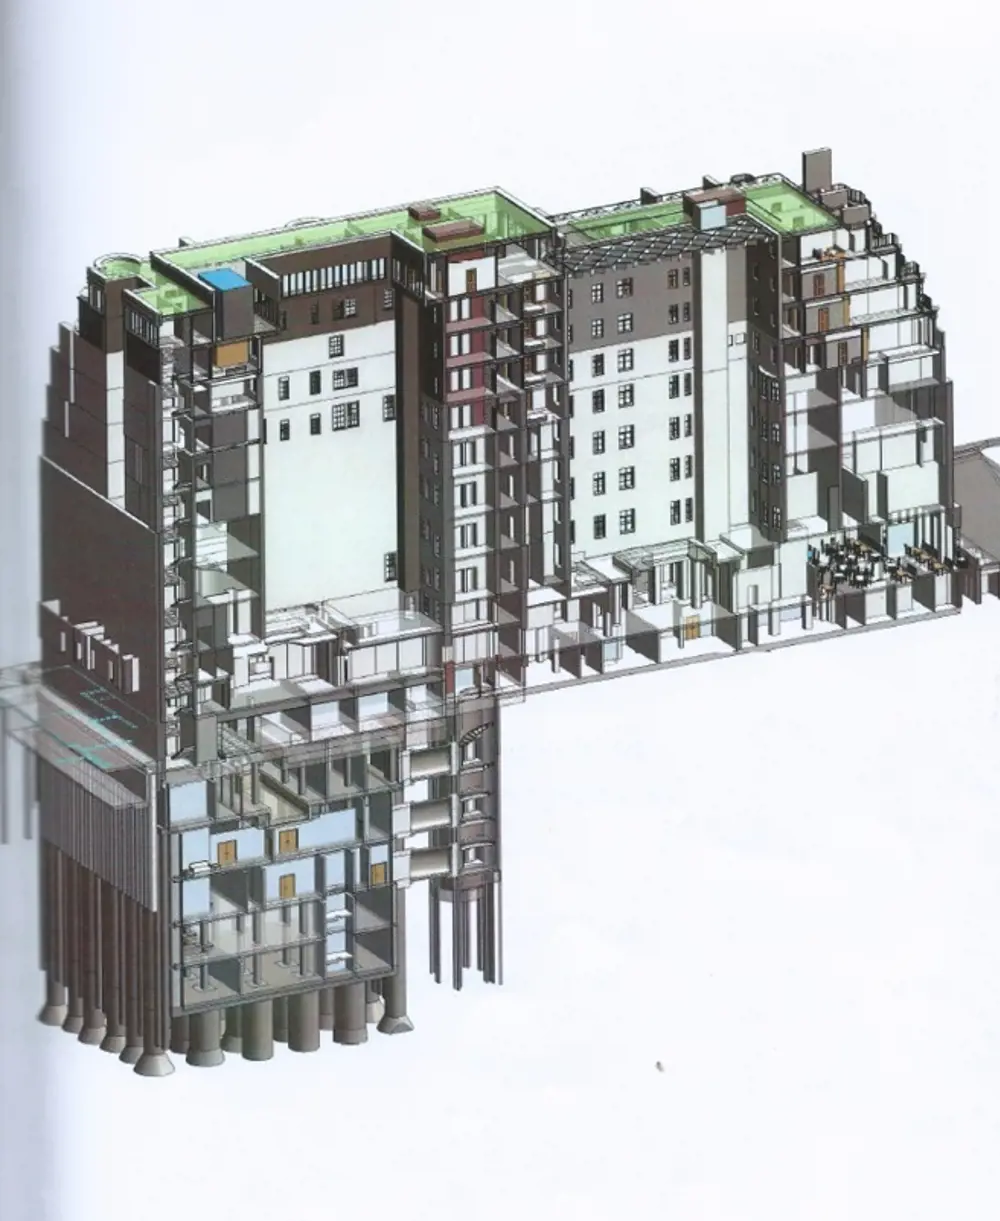 A computer generated design of a cross section of the Claridge's hotel building, showing the basement extending underground on one side of the building. 